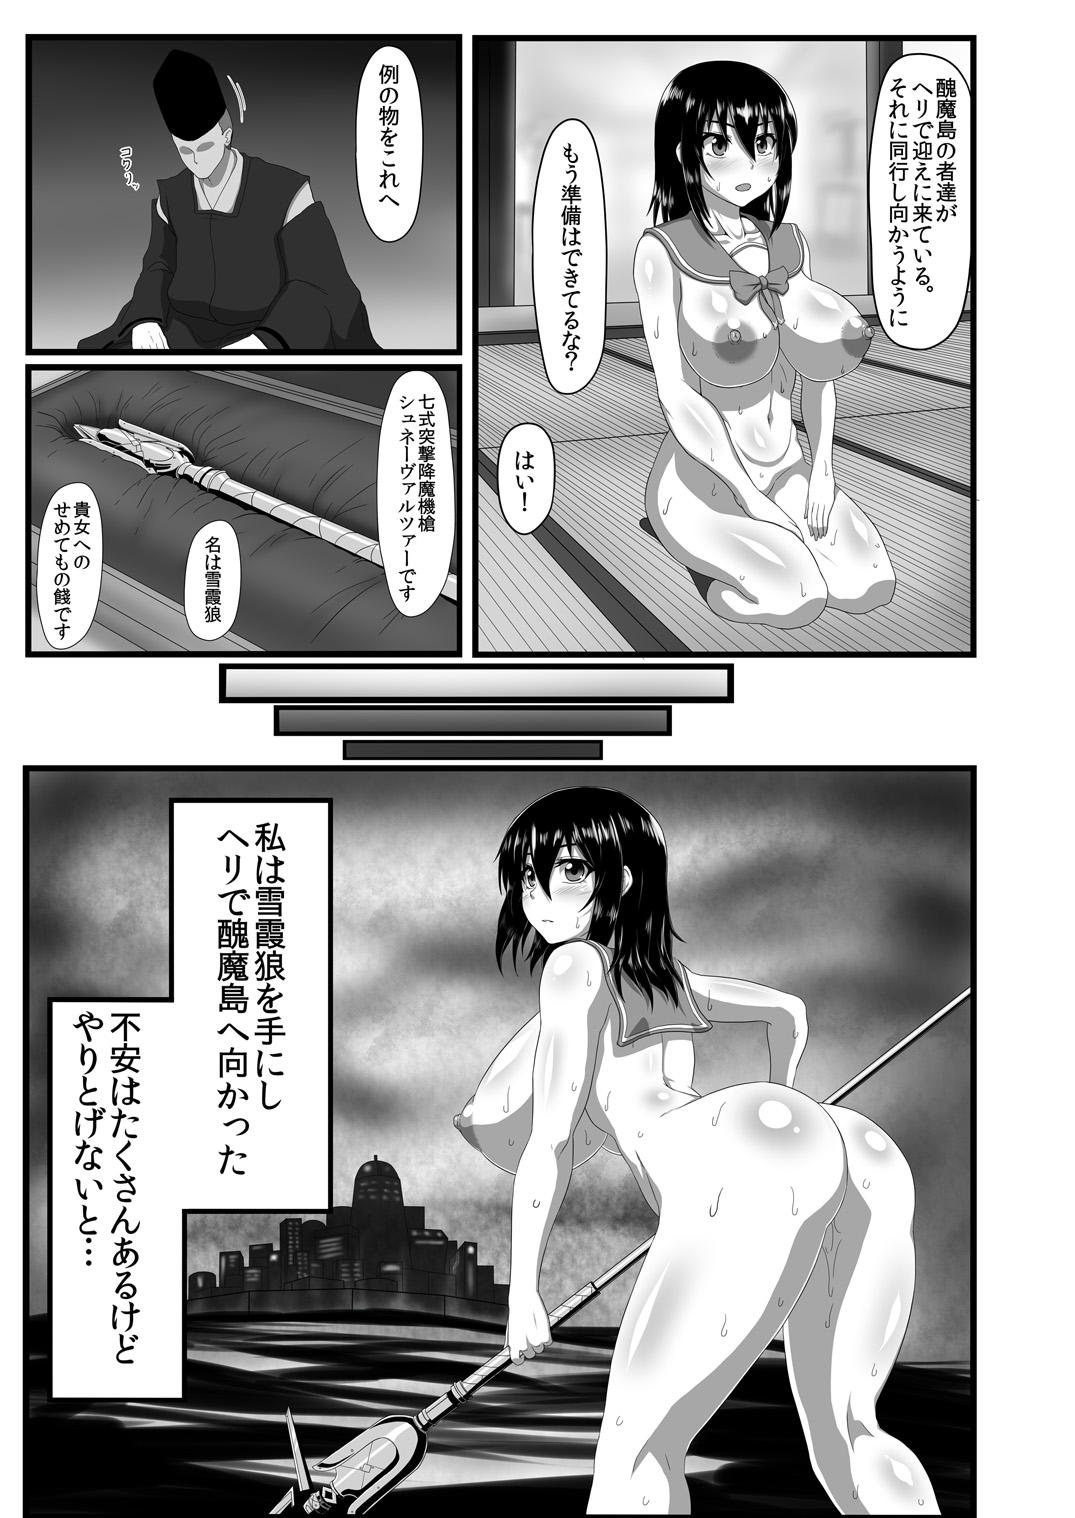 Ikillitts Slave the Blood - Strike the blood Swedish - Page 10